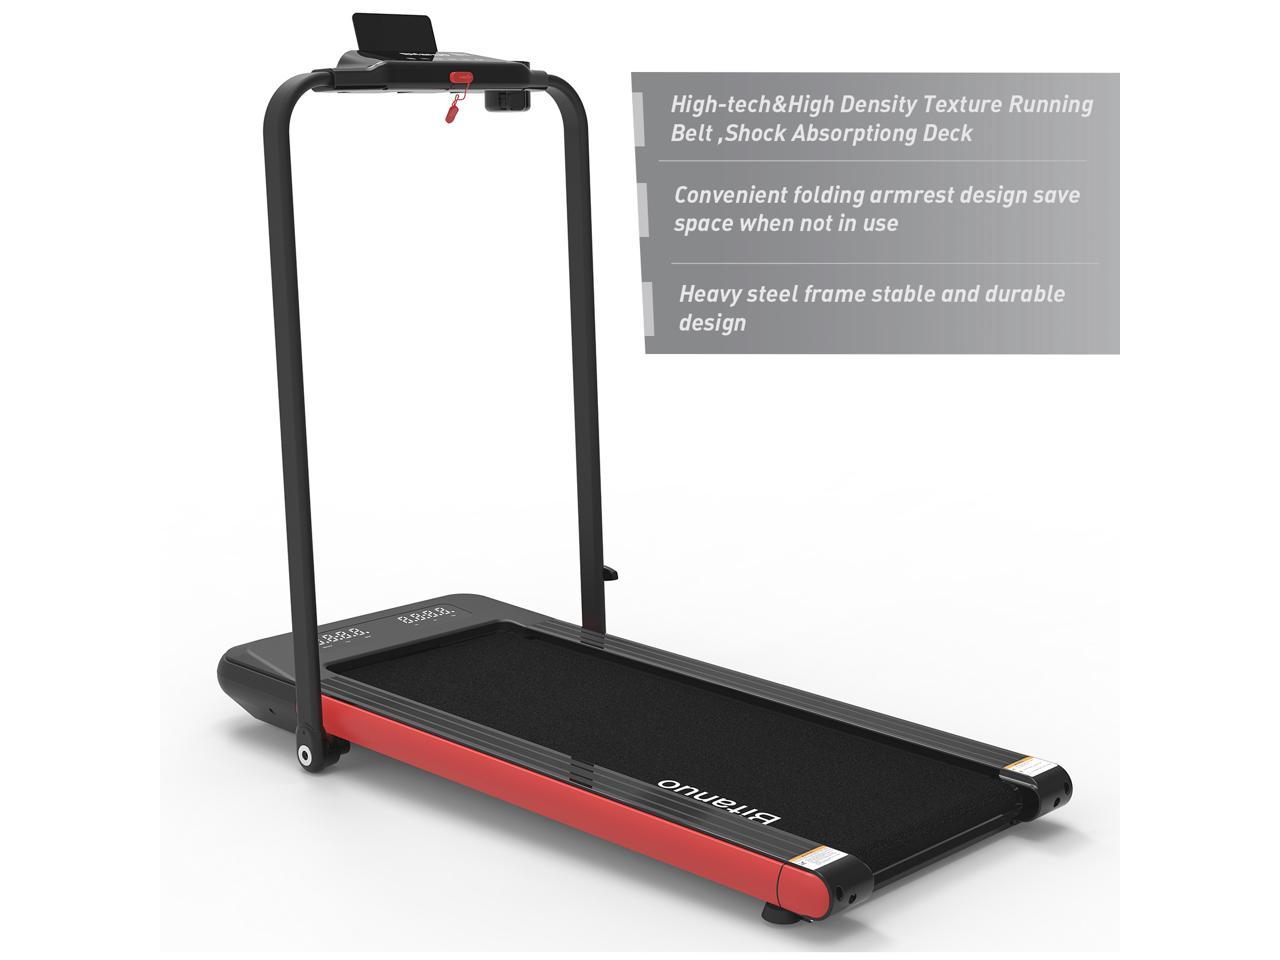 BiFanuo 2 in 1 Folding Treadmill Installation-Free，Under Desk Treadmill for Home/Office Gym Cardio Fitness Smart Walking Running Machine with Bluetooth Audio Speakers 